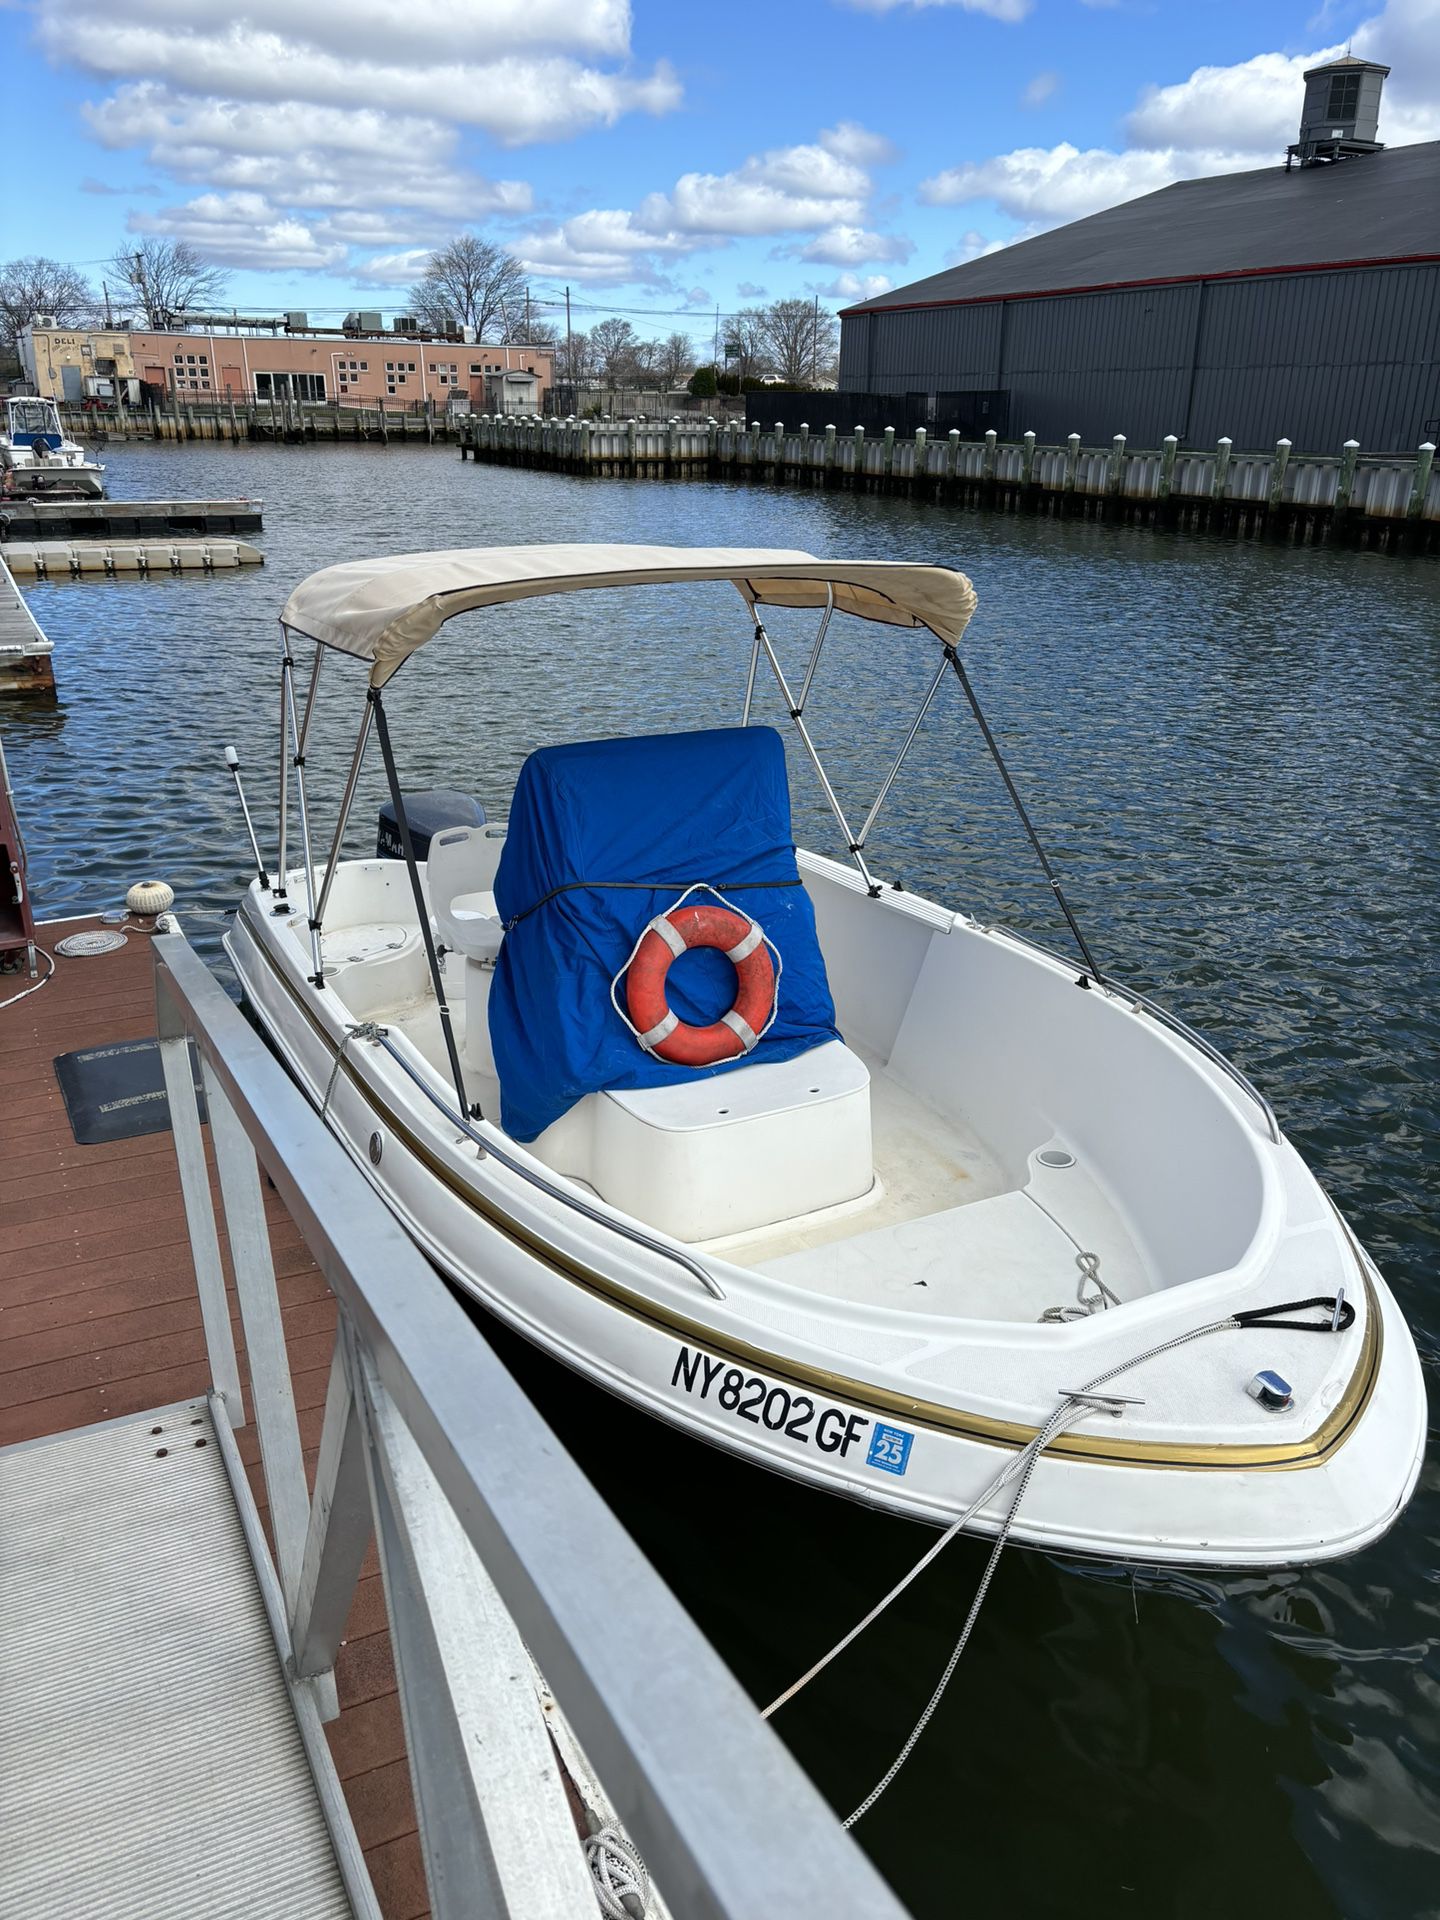 2003 Wellcraft center console w 115 Yamaha   2003 Wellcraft 180 Fisherman Tournament Series (Yamaha 115 V4) Here is the perfect family size and motor 